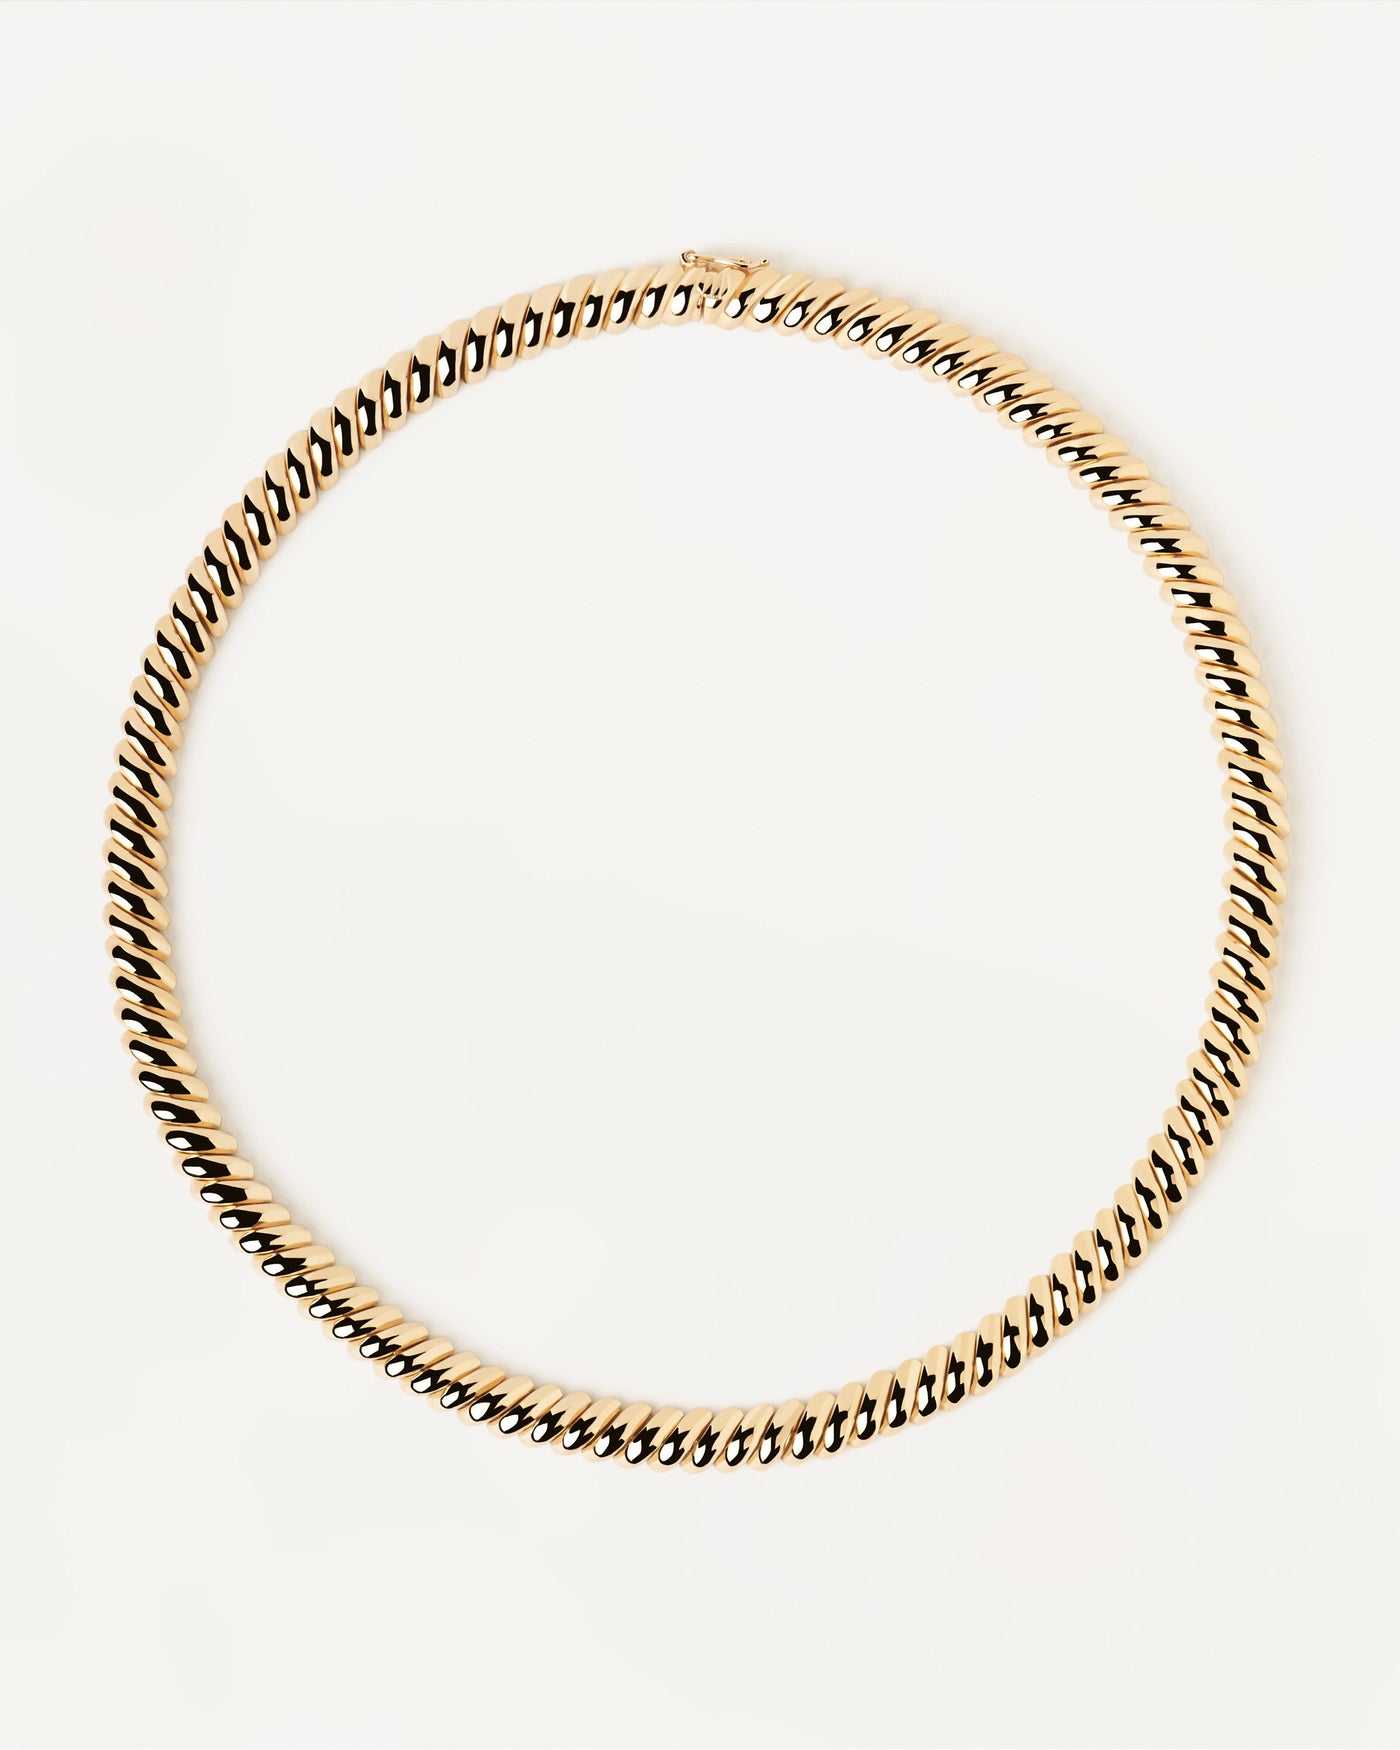 2023 Selection | Gaia Necklace. Gold-plated silver chain necklace with San Marco links. Get the latest arrival from PDPAOLA. Place your order safely and get this Best Seller. Free Shipping.